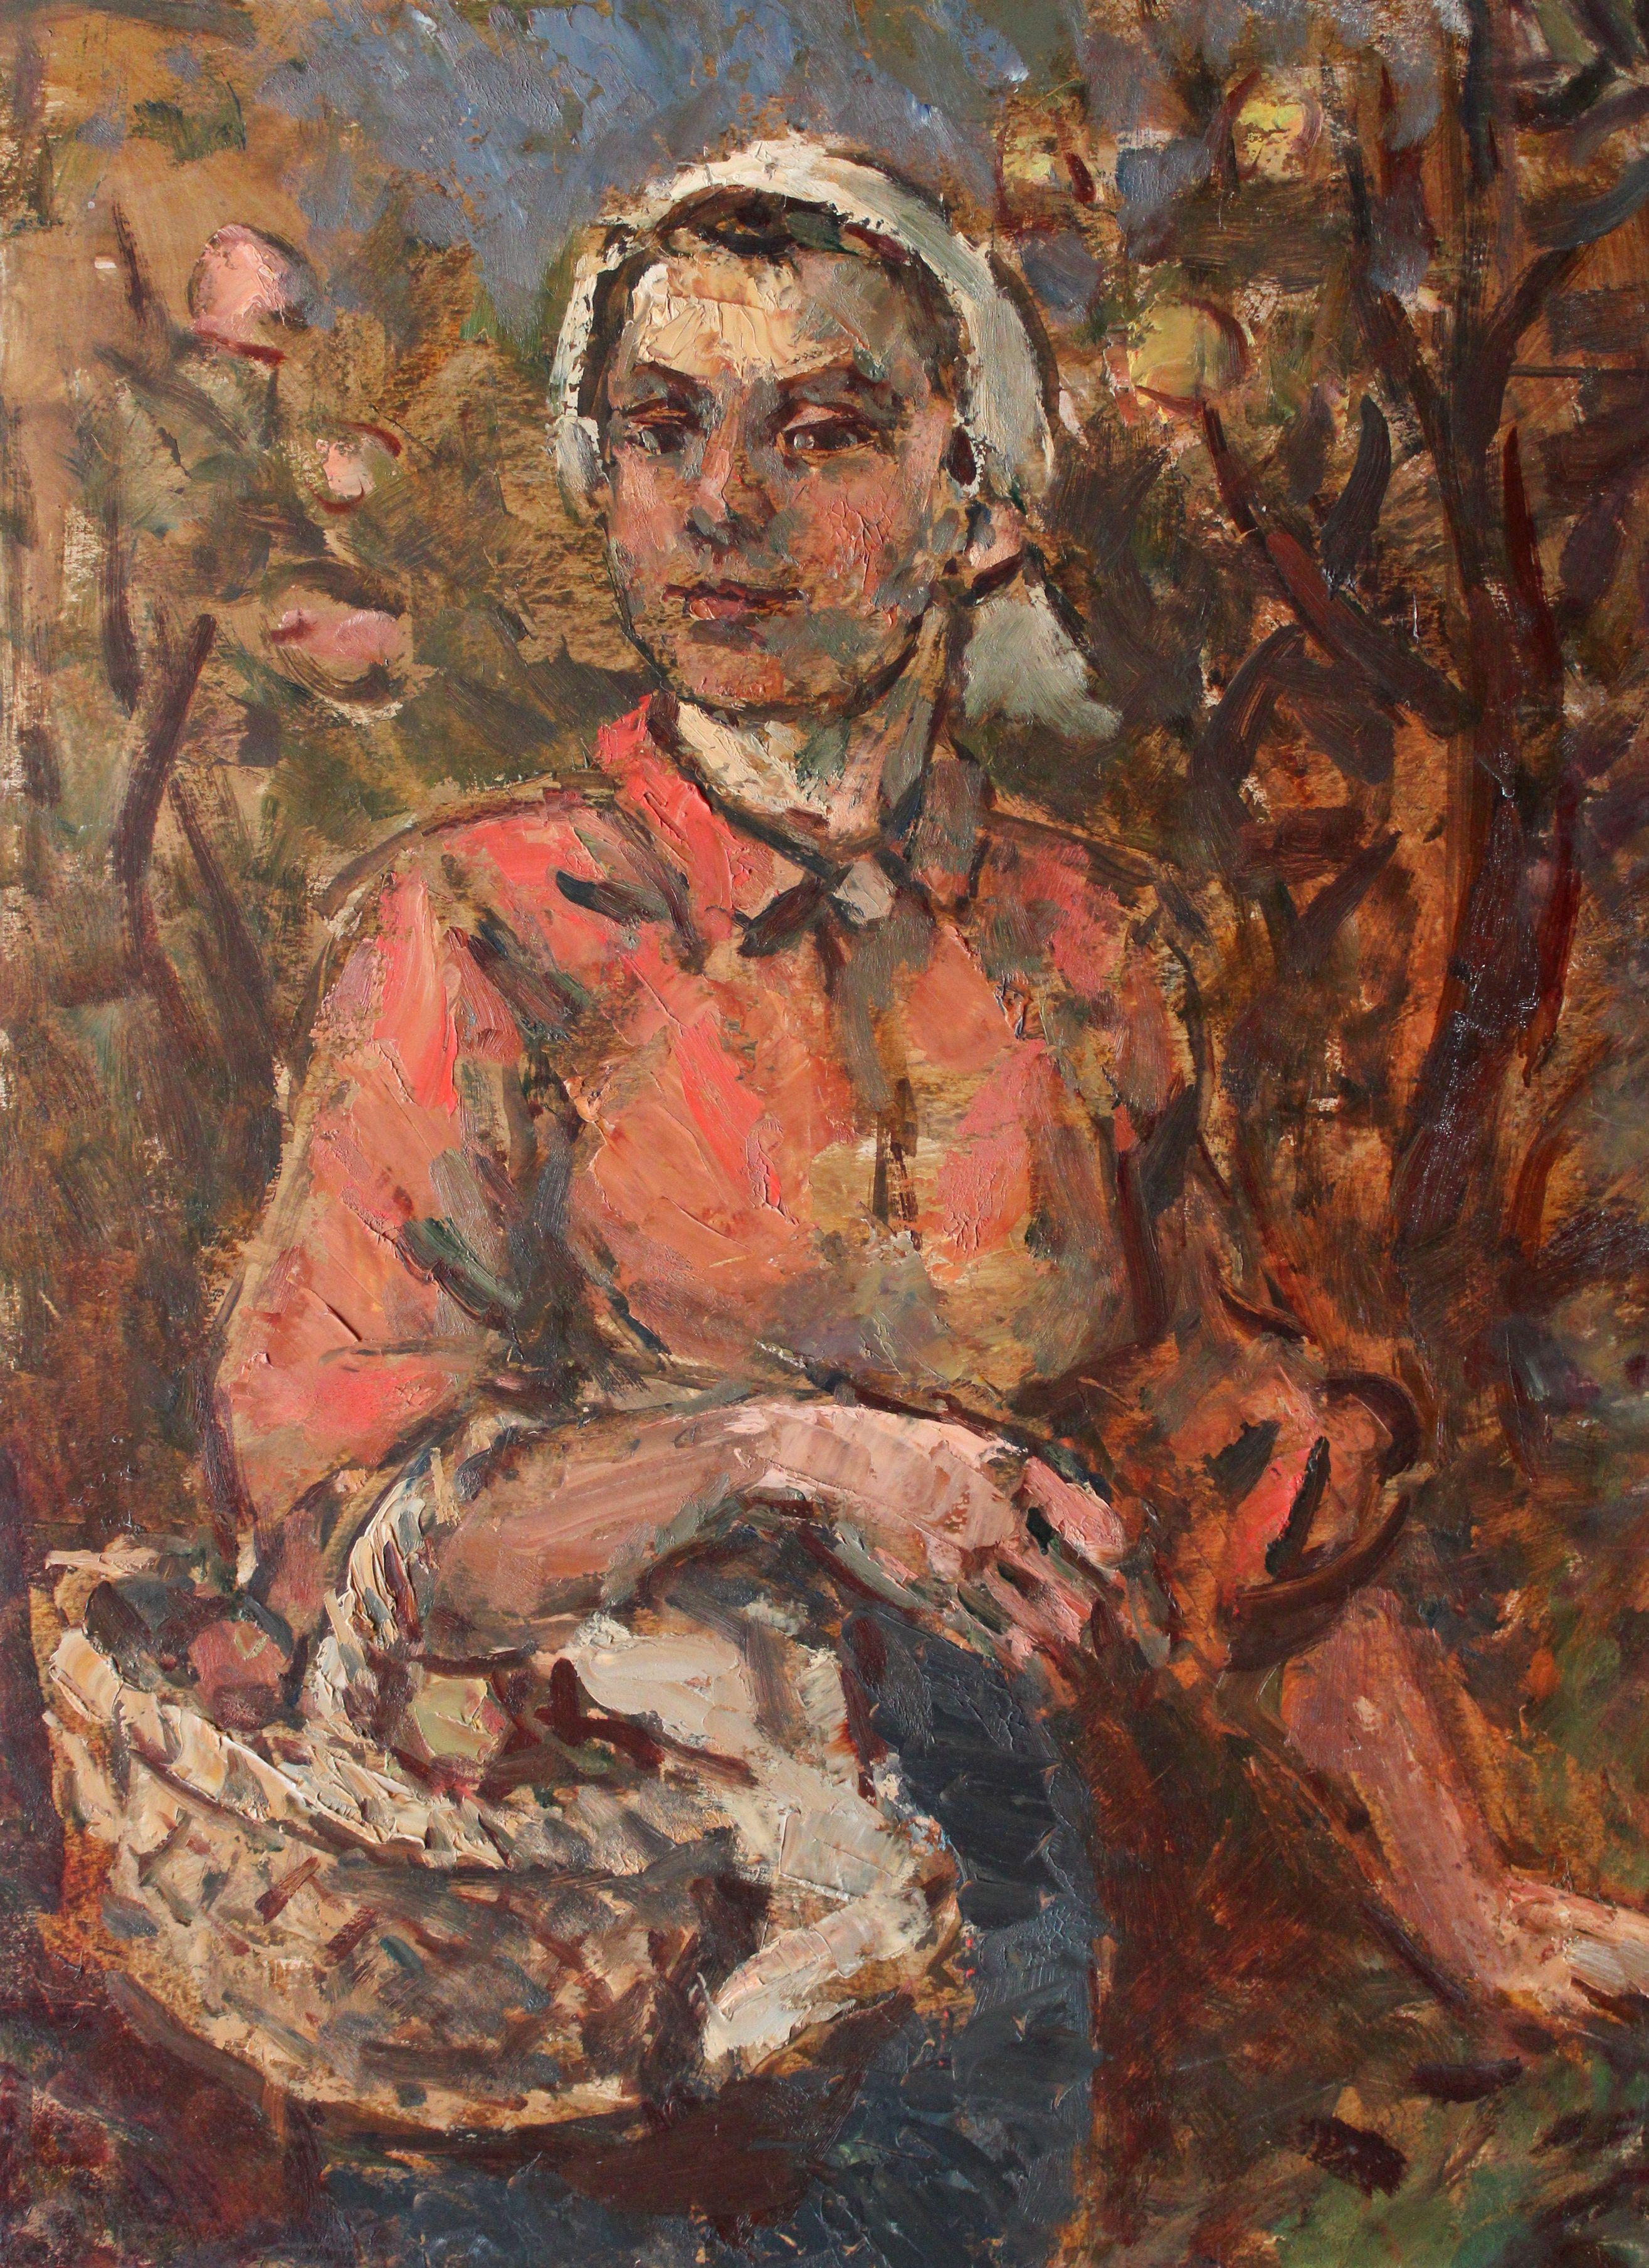 Janis Rikmanis Figurative Painting - At the autumn garden. Oil on cardboard, 80 x 57 cm